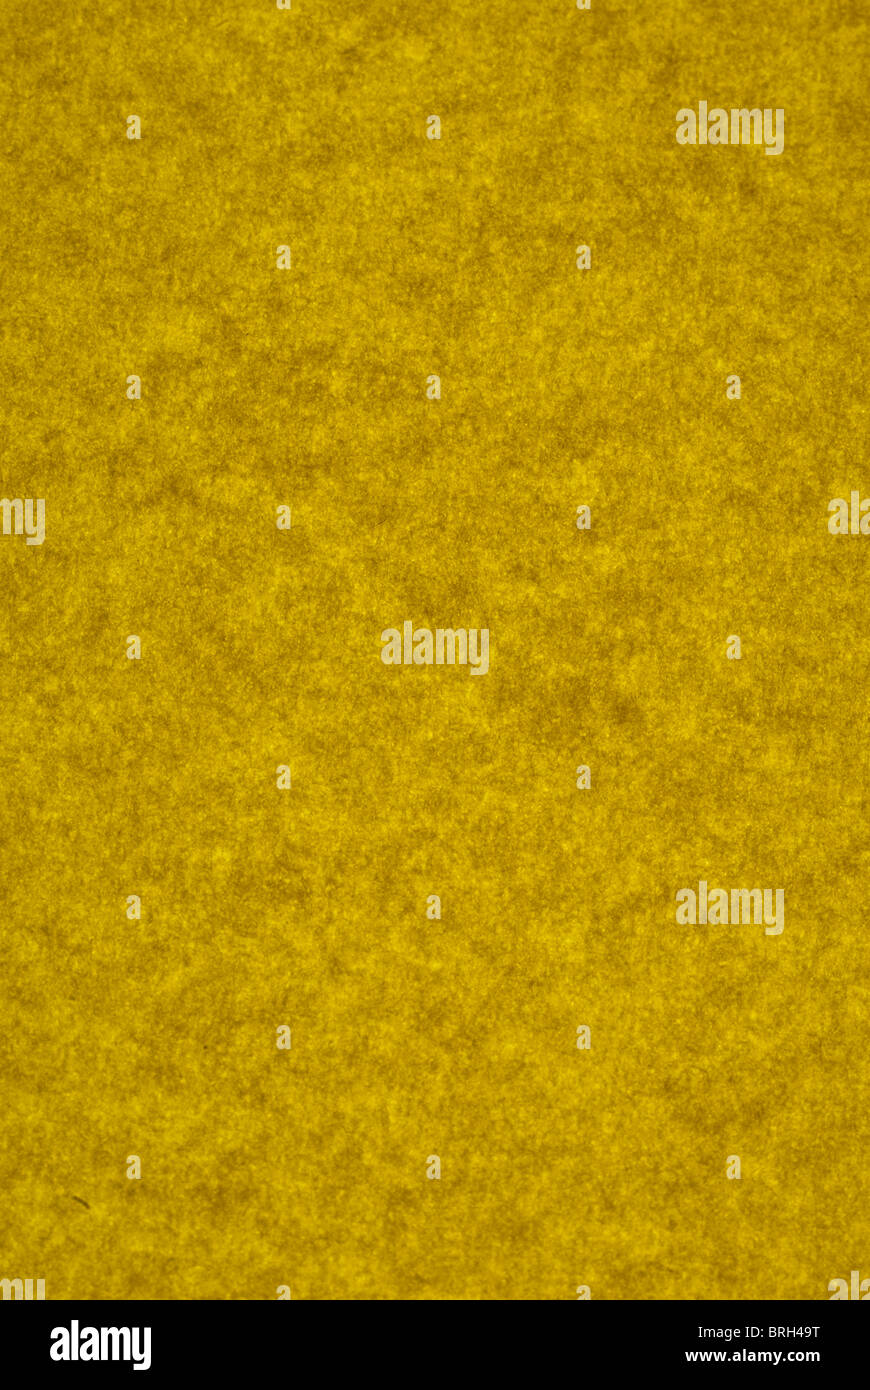 Yellow mottled background as seen on lightbox Stock Photo